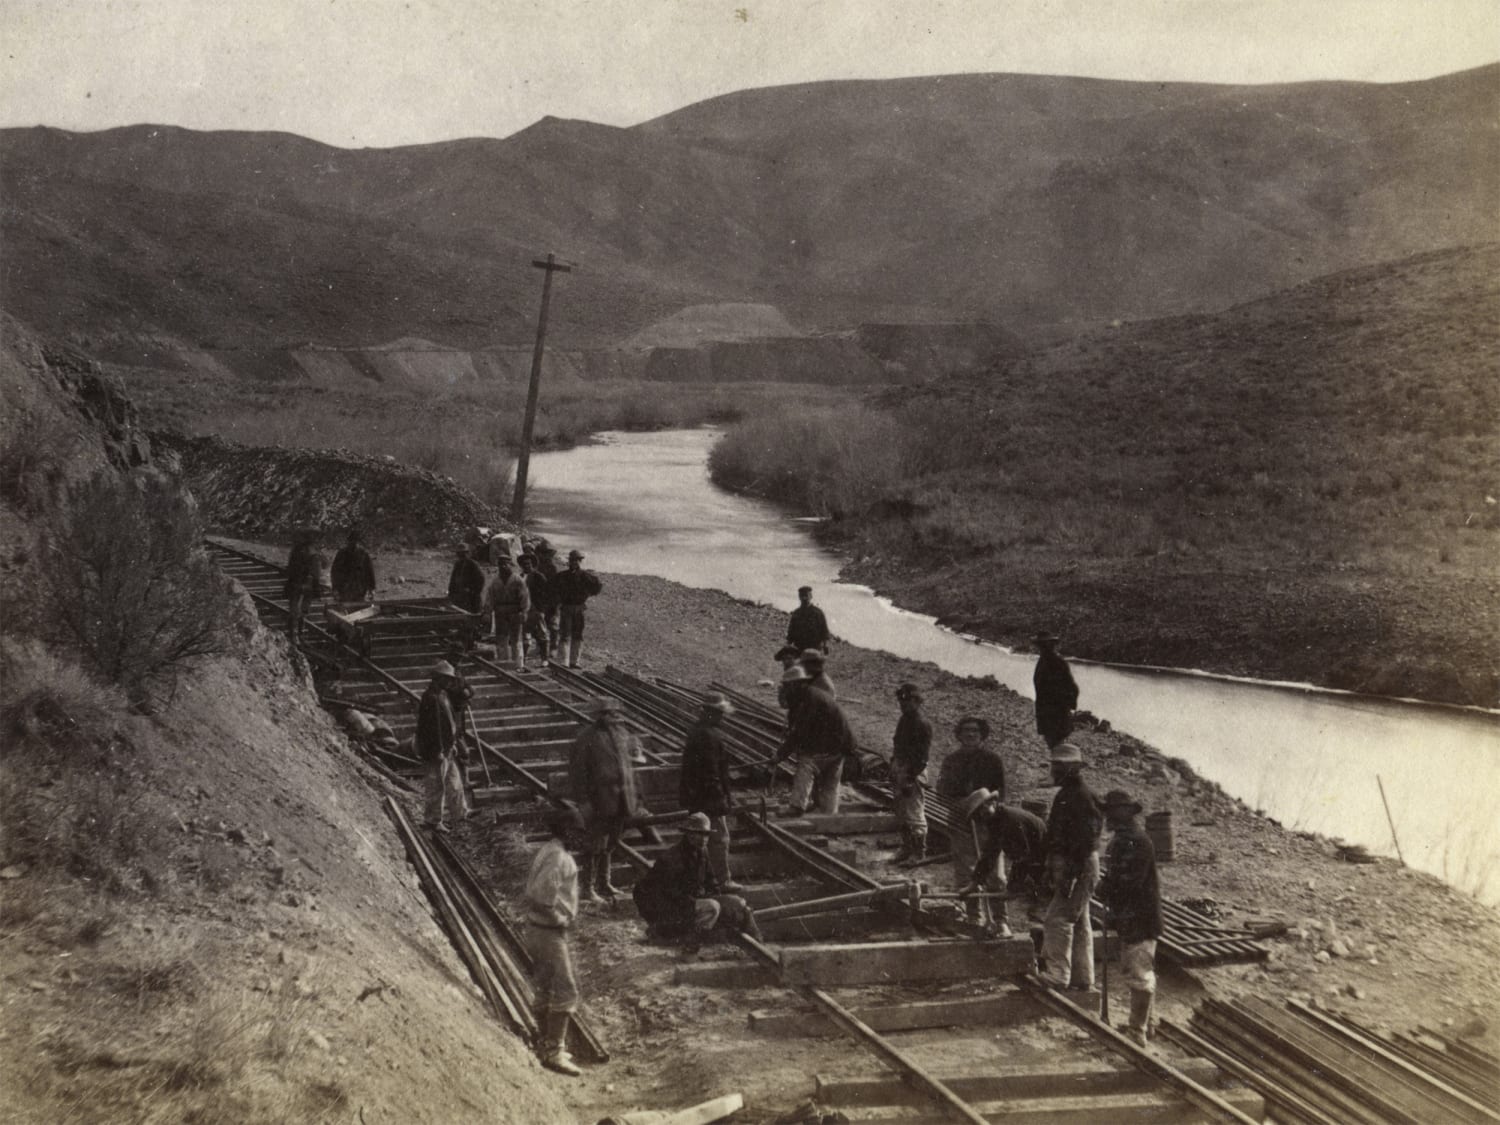 transcontinental railroad workers conditions